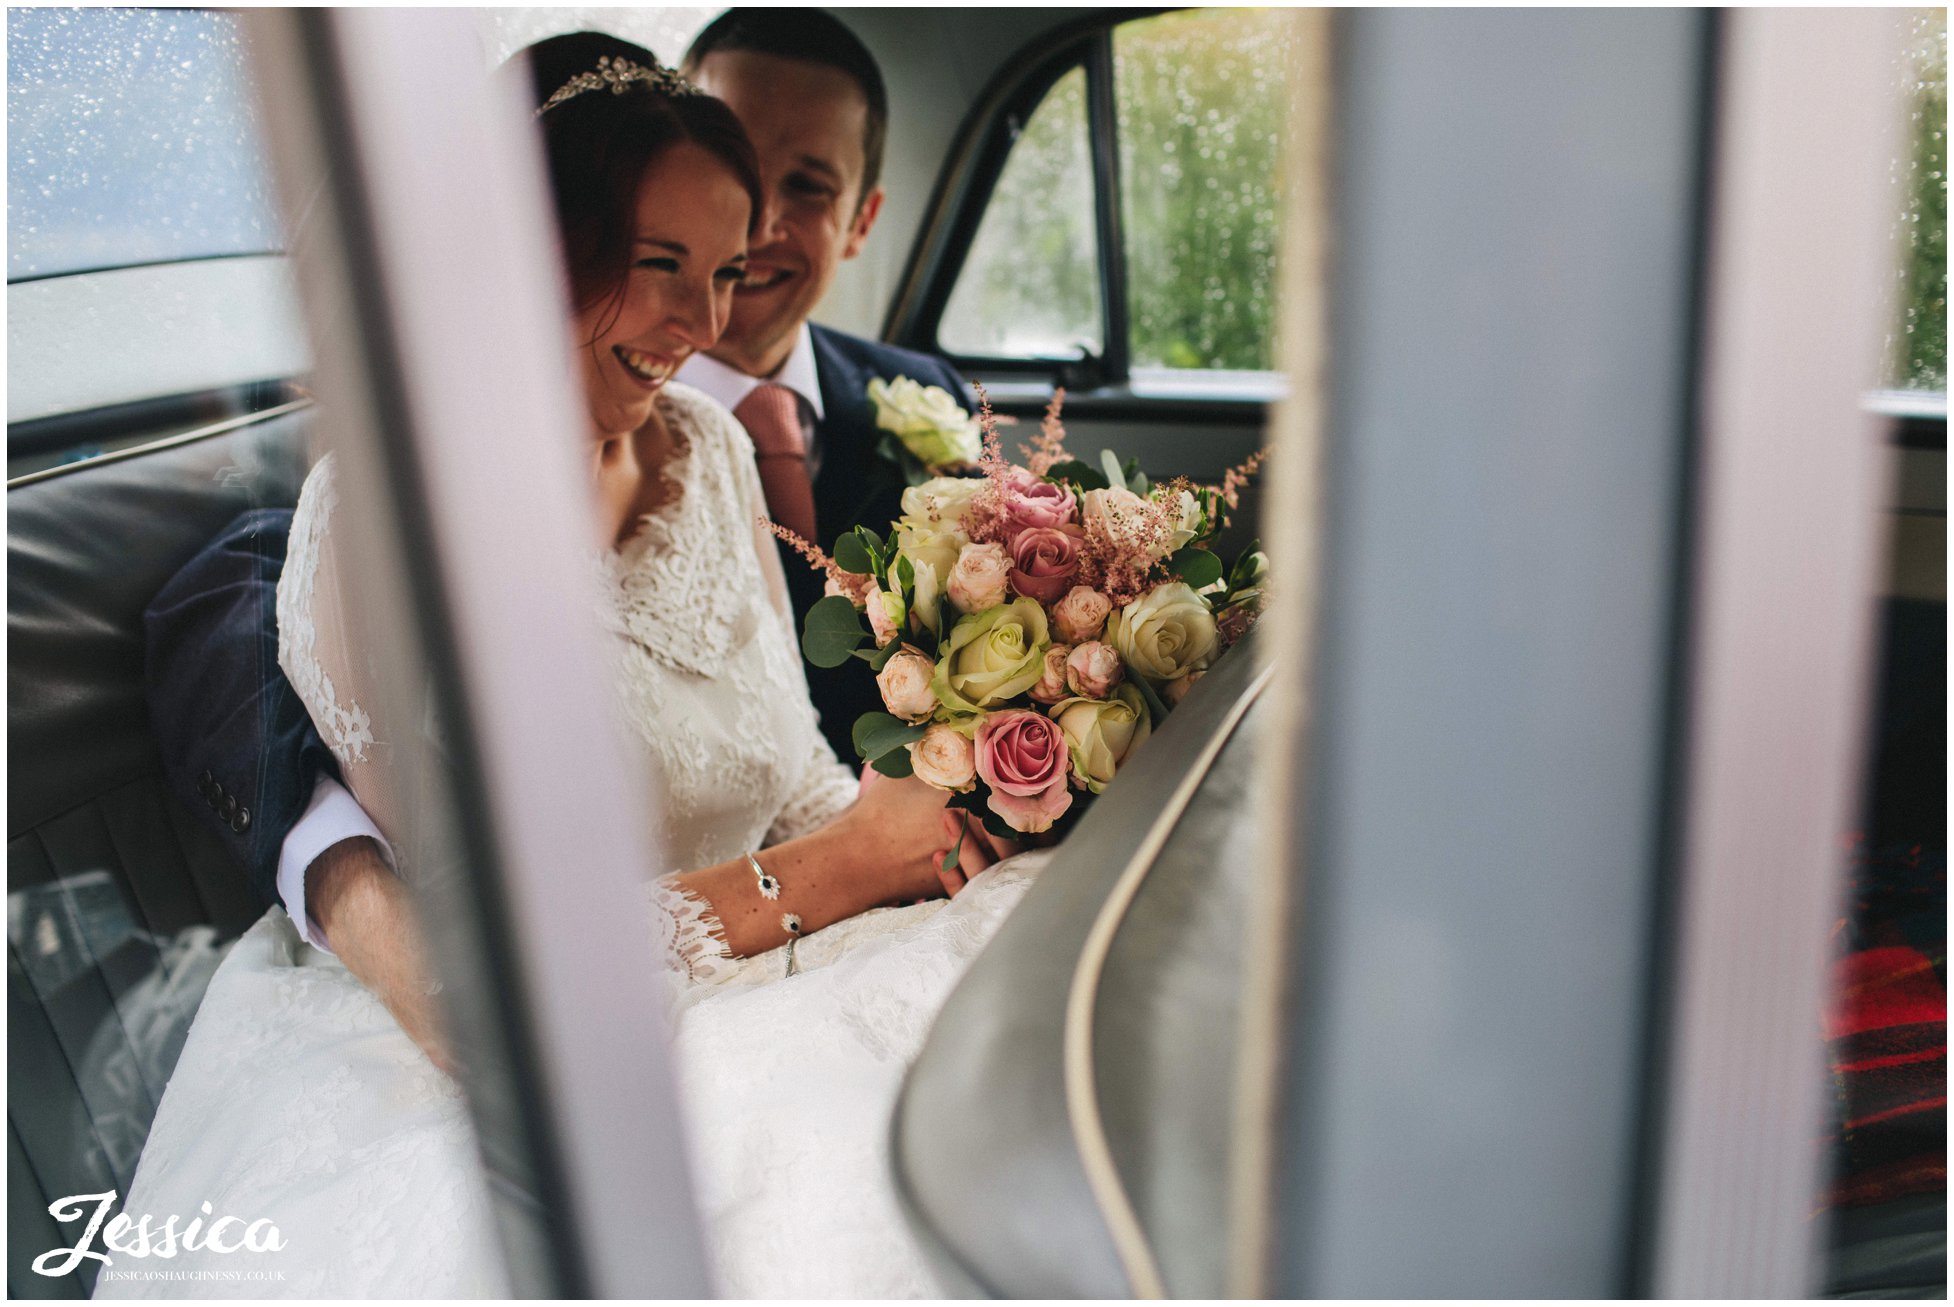 newly wed's laughing together in the back of their wedding car